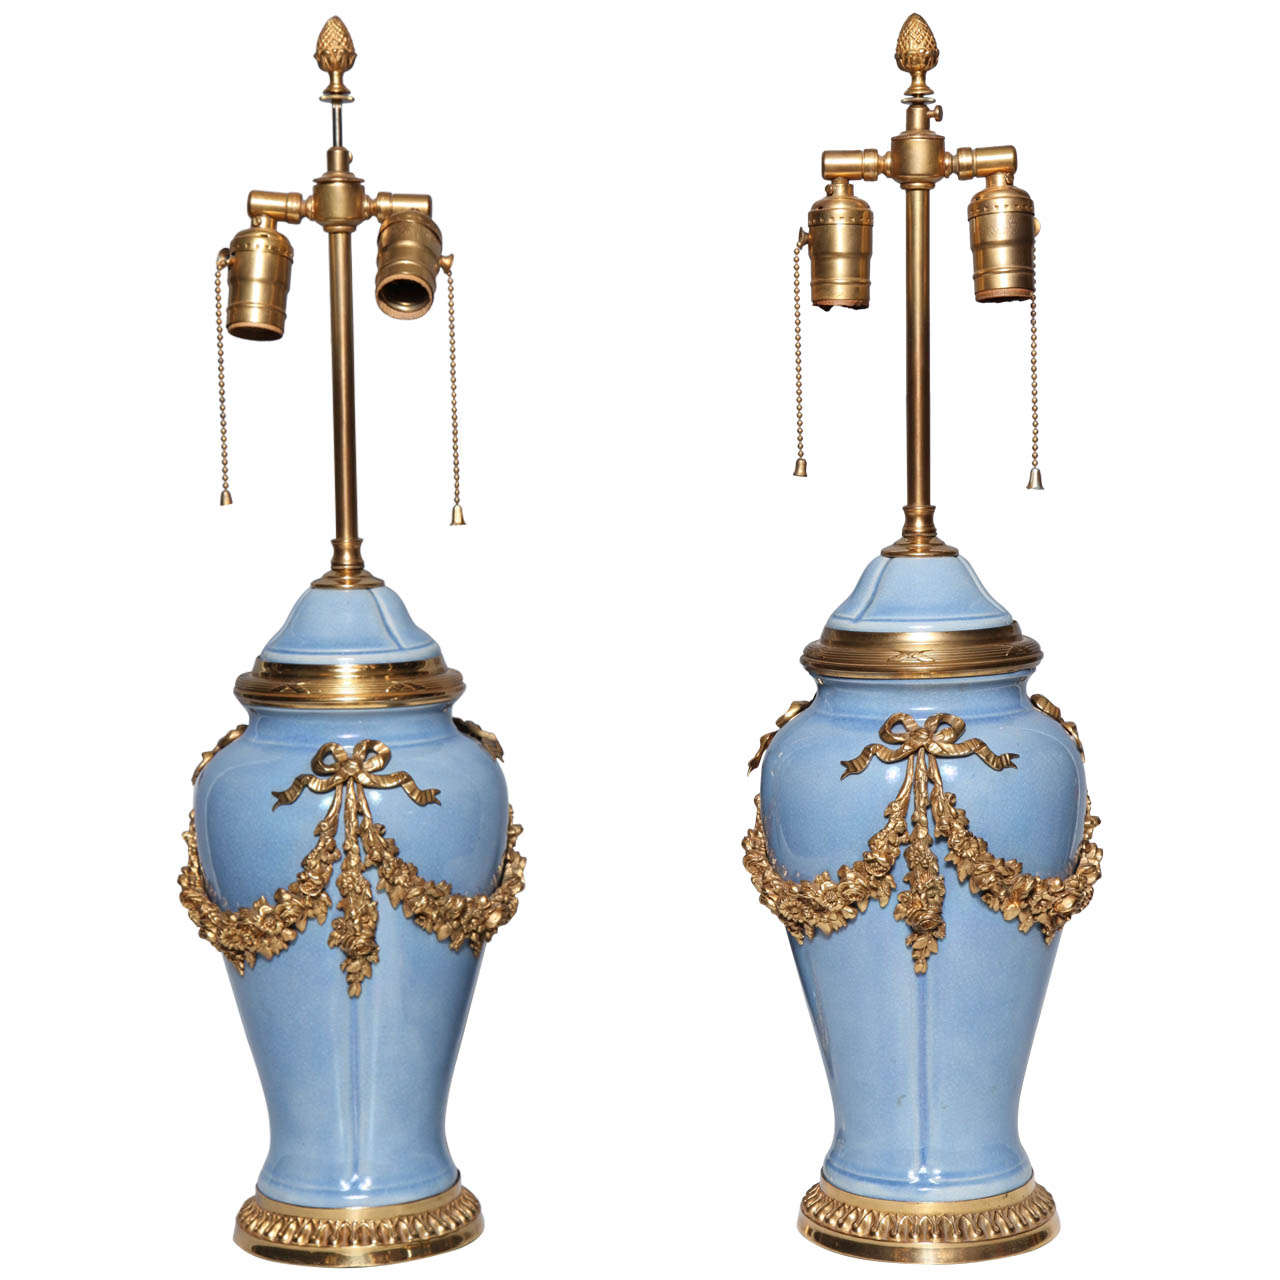 Pair of Louis XVI style Ormolu Mounted Chinese Porcelain Vases mounted lamps